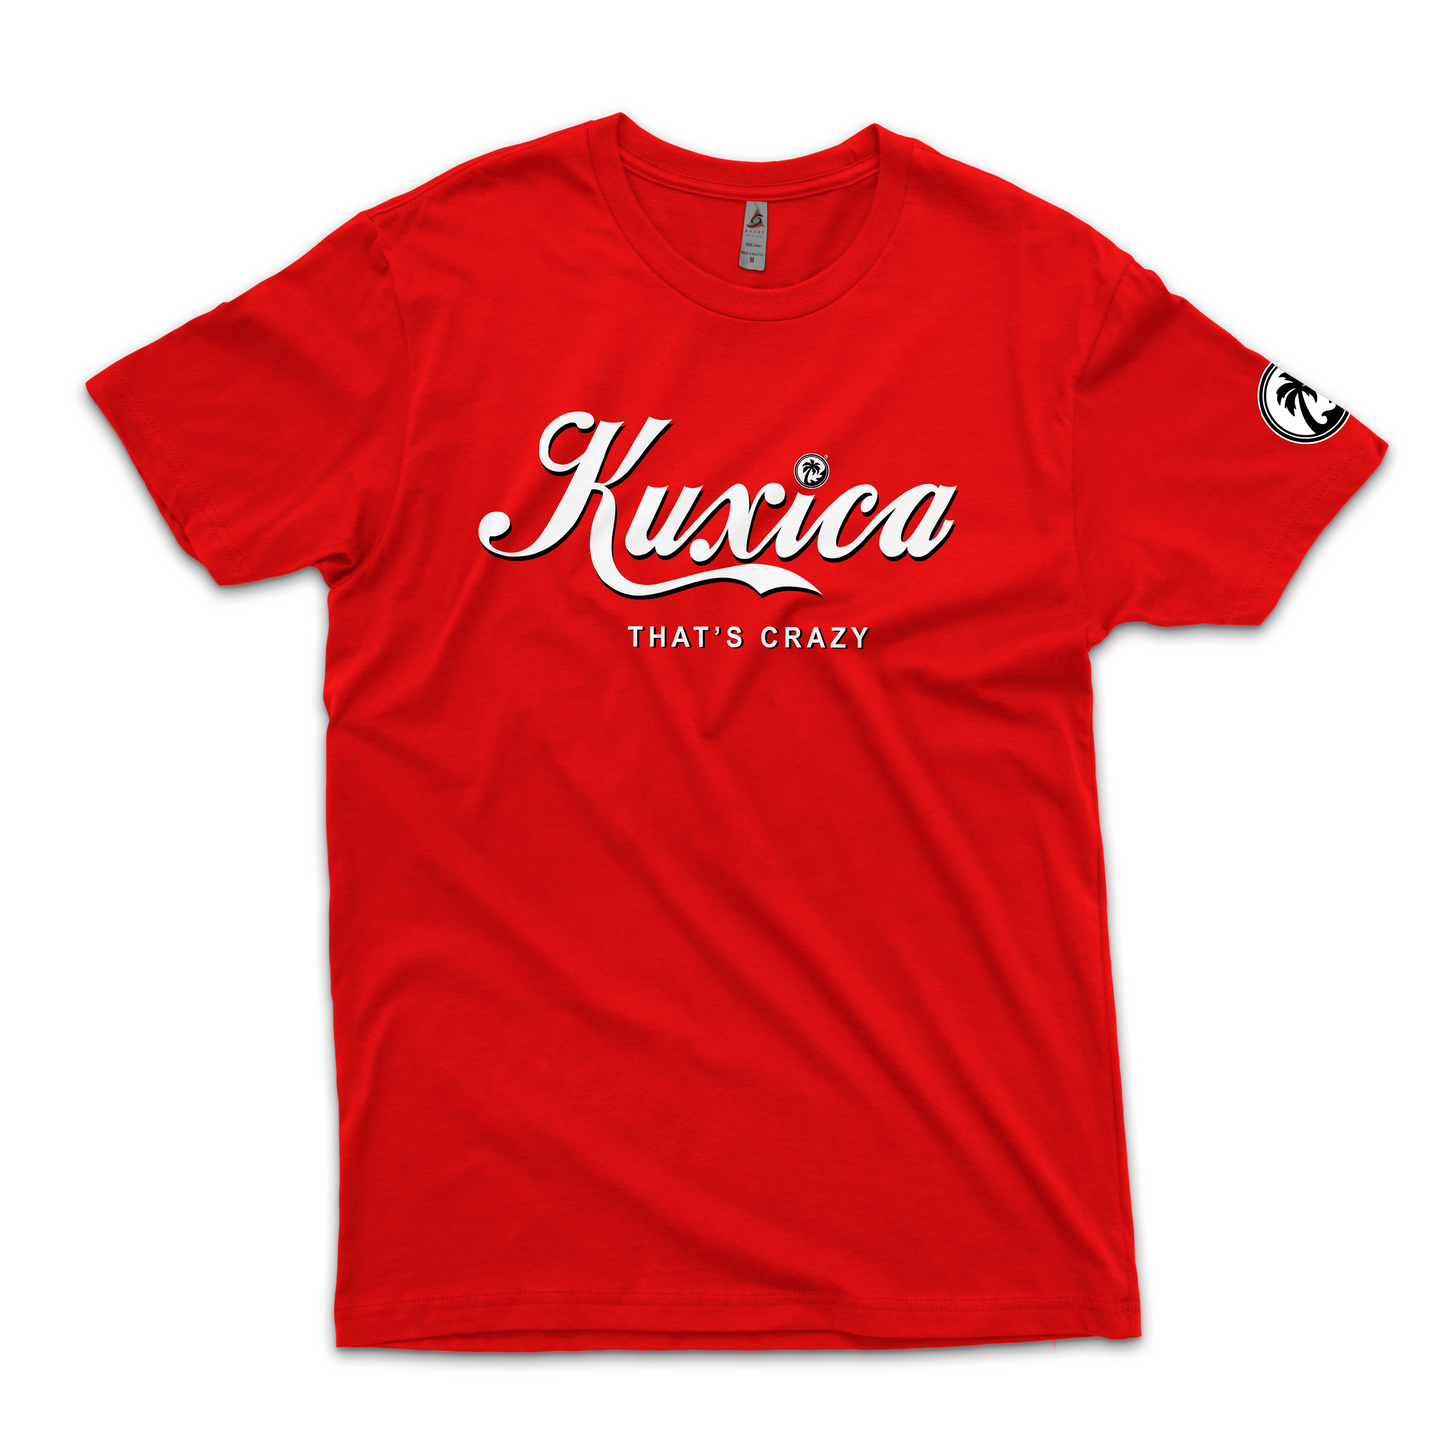 Kuxica - Short Sleeve: Red